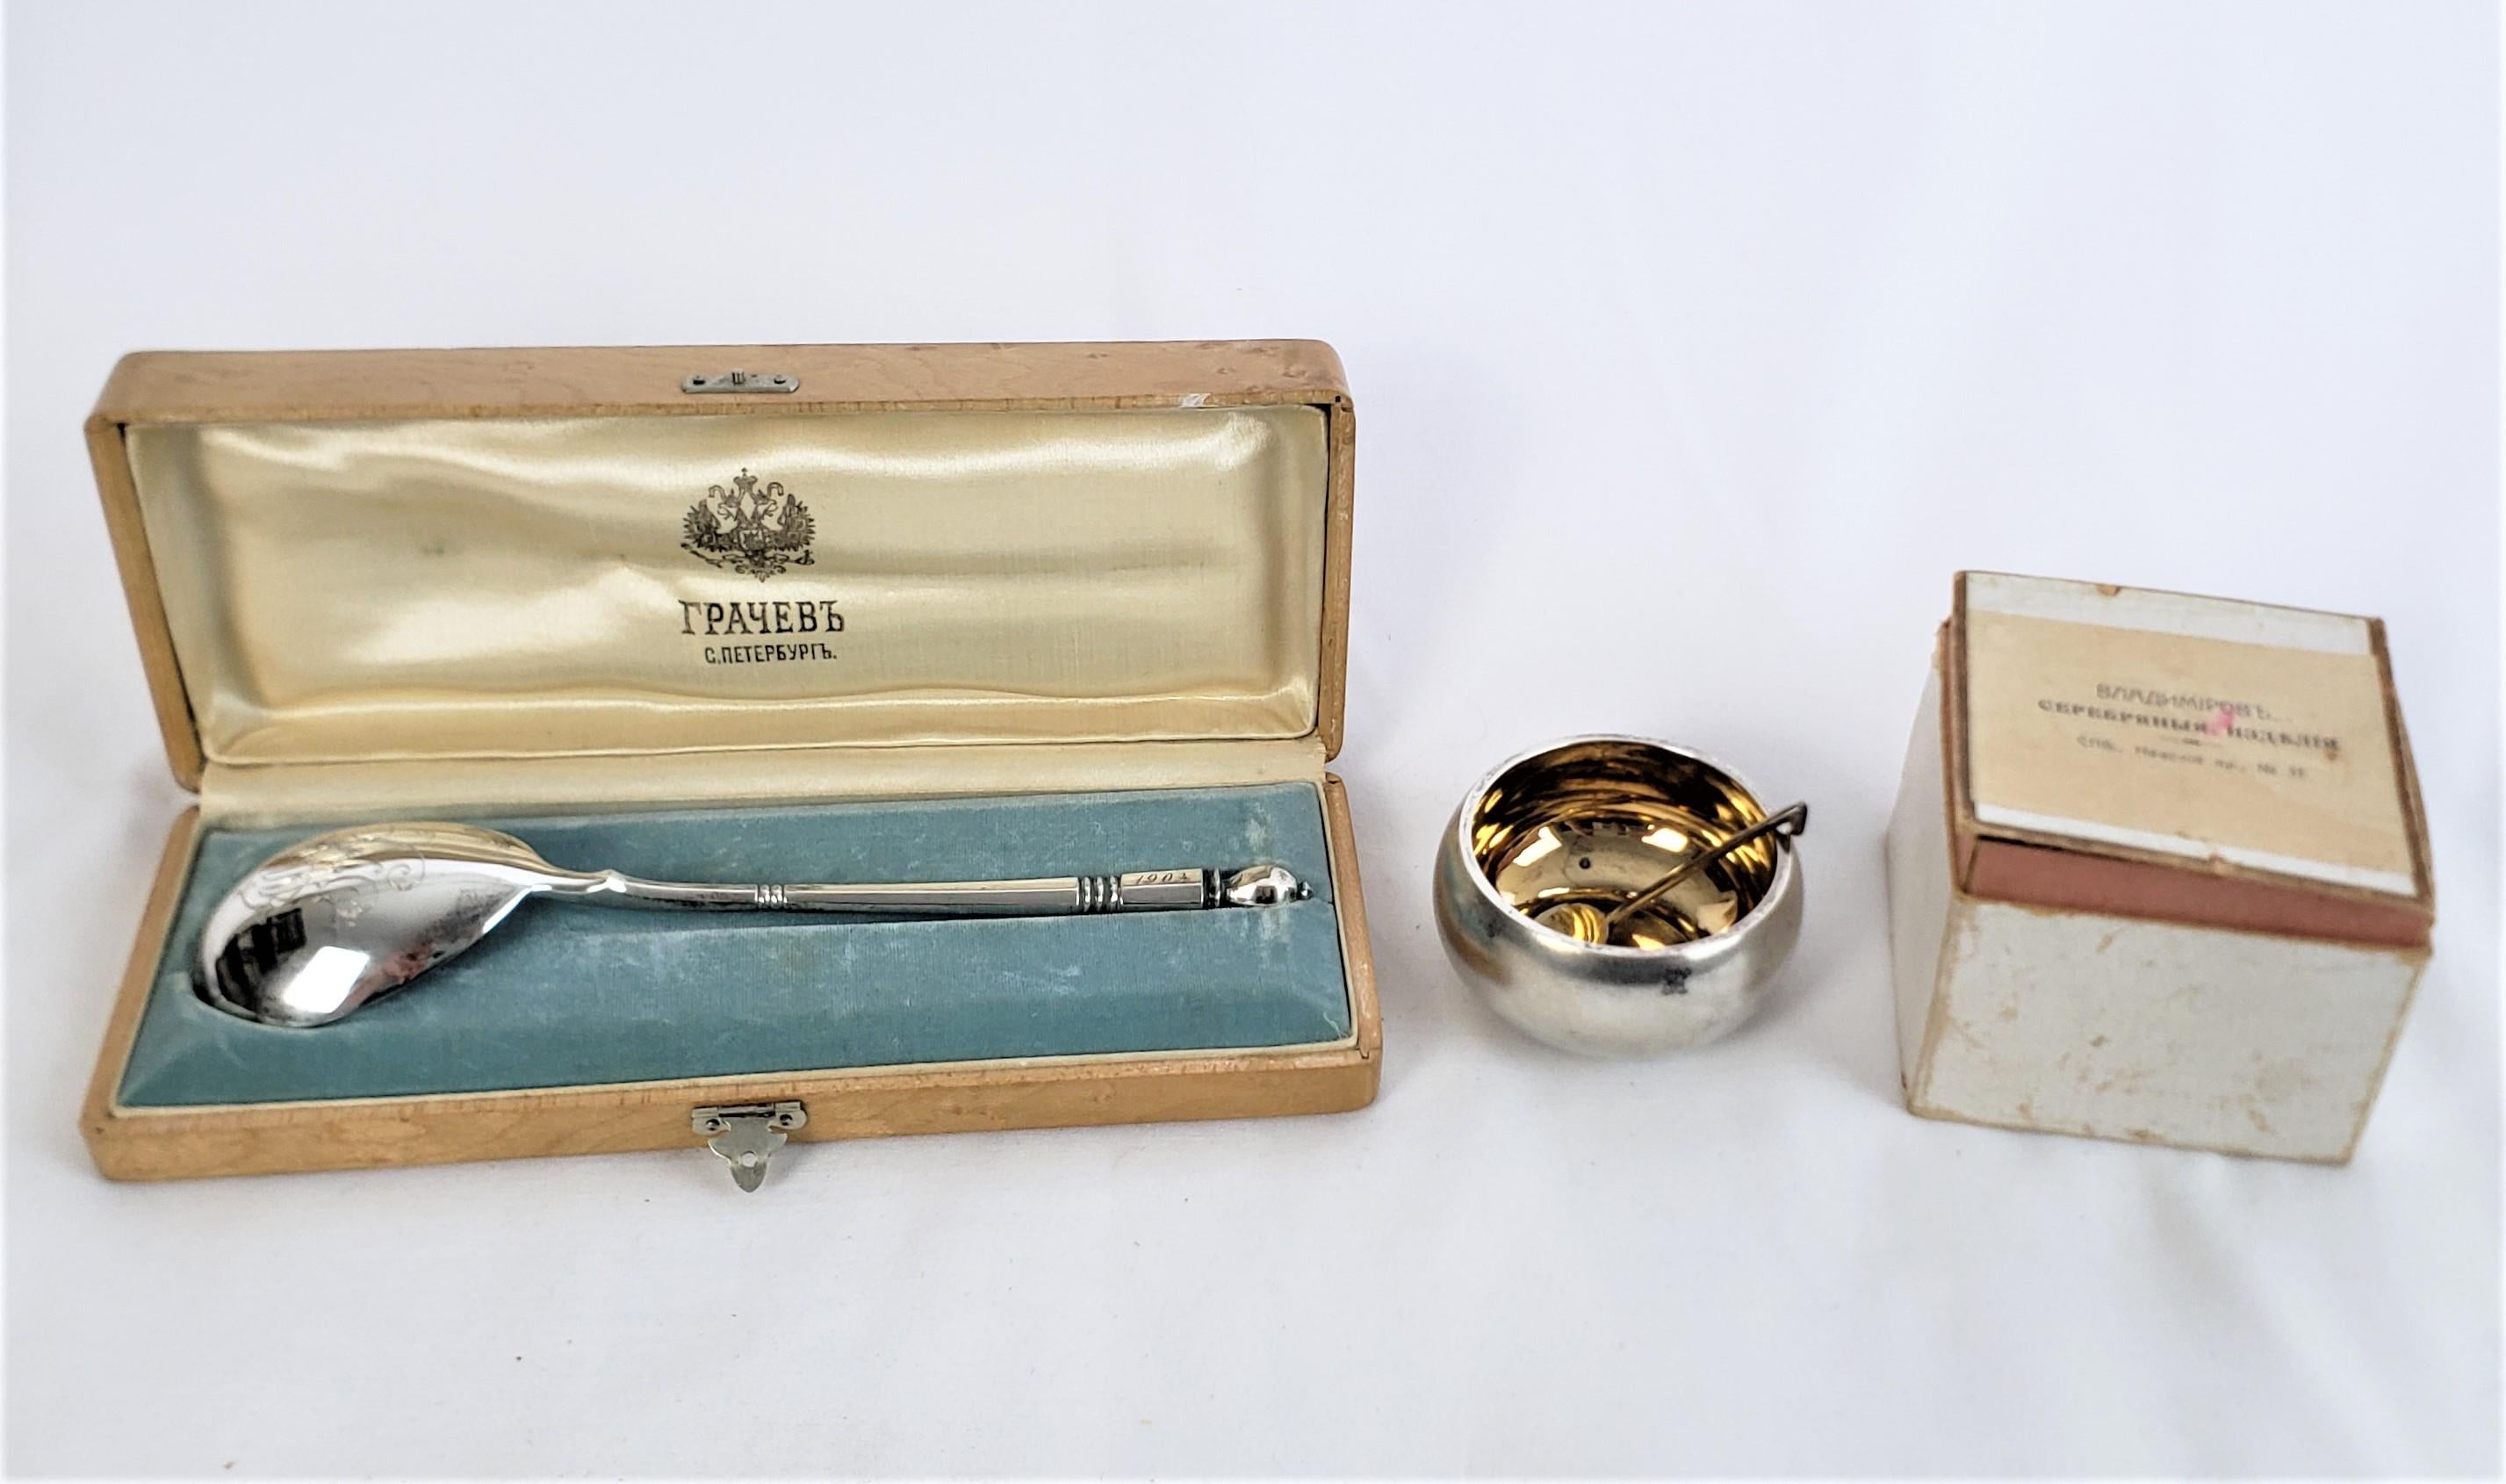 This pairing consists of an antique Tsarist Russian serving spoon with a fitted case and an antique Tsarist Russian open salt cellar and spoon with its original cardboard box. The spoons and salt cellar date to approximately 1903-1910 and are done